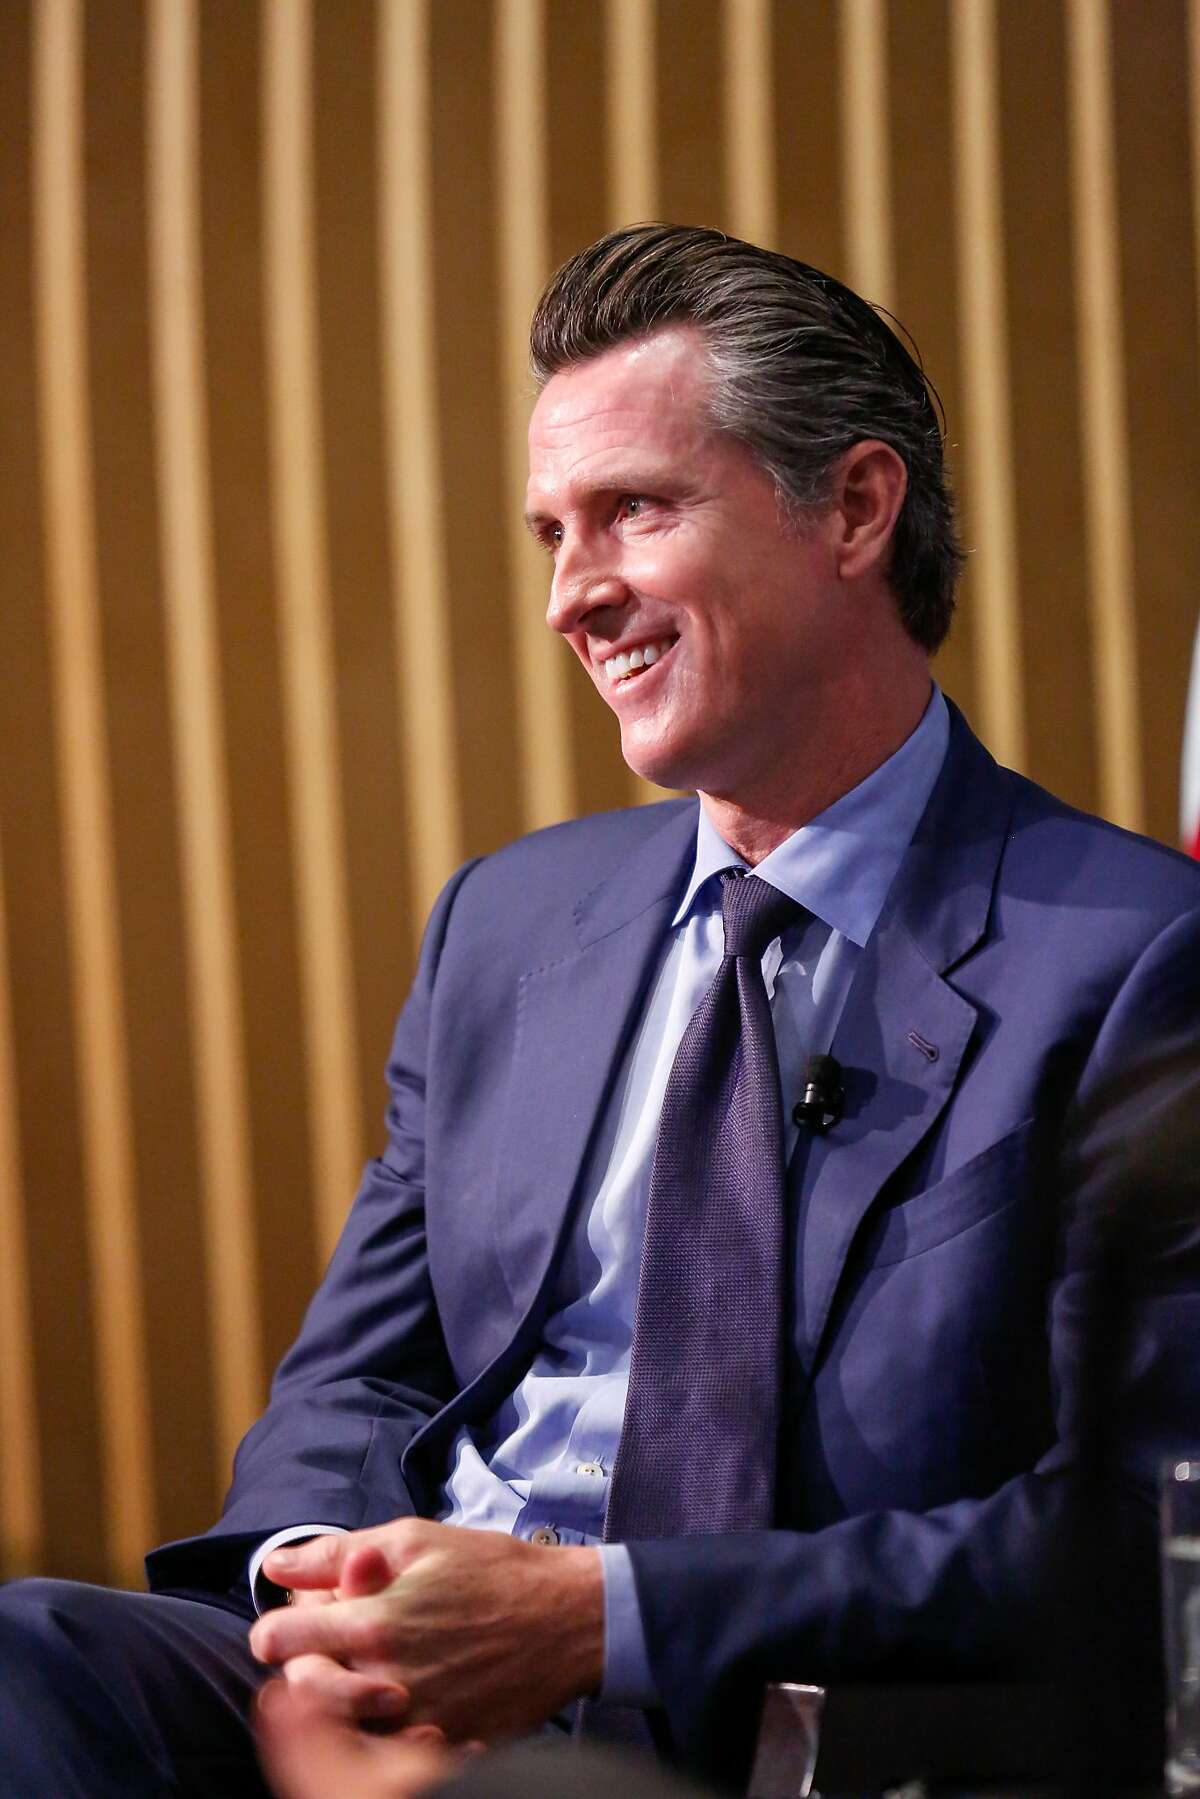 Lieutenant governor Gavin Newsom speaks with Mark Baldassare at the Public Policy Institute of California on Thursday, November 9, 2017 in San Francisco, Calif.